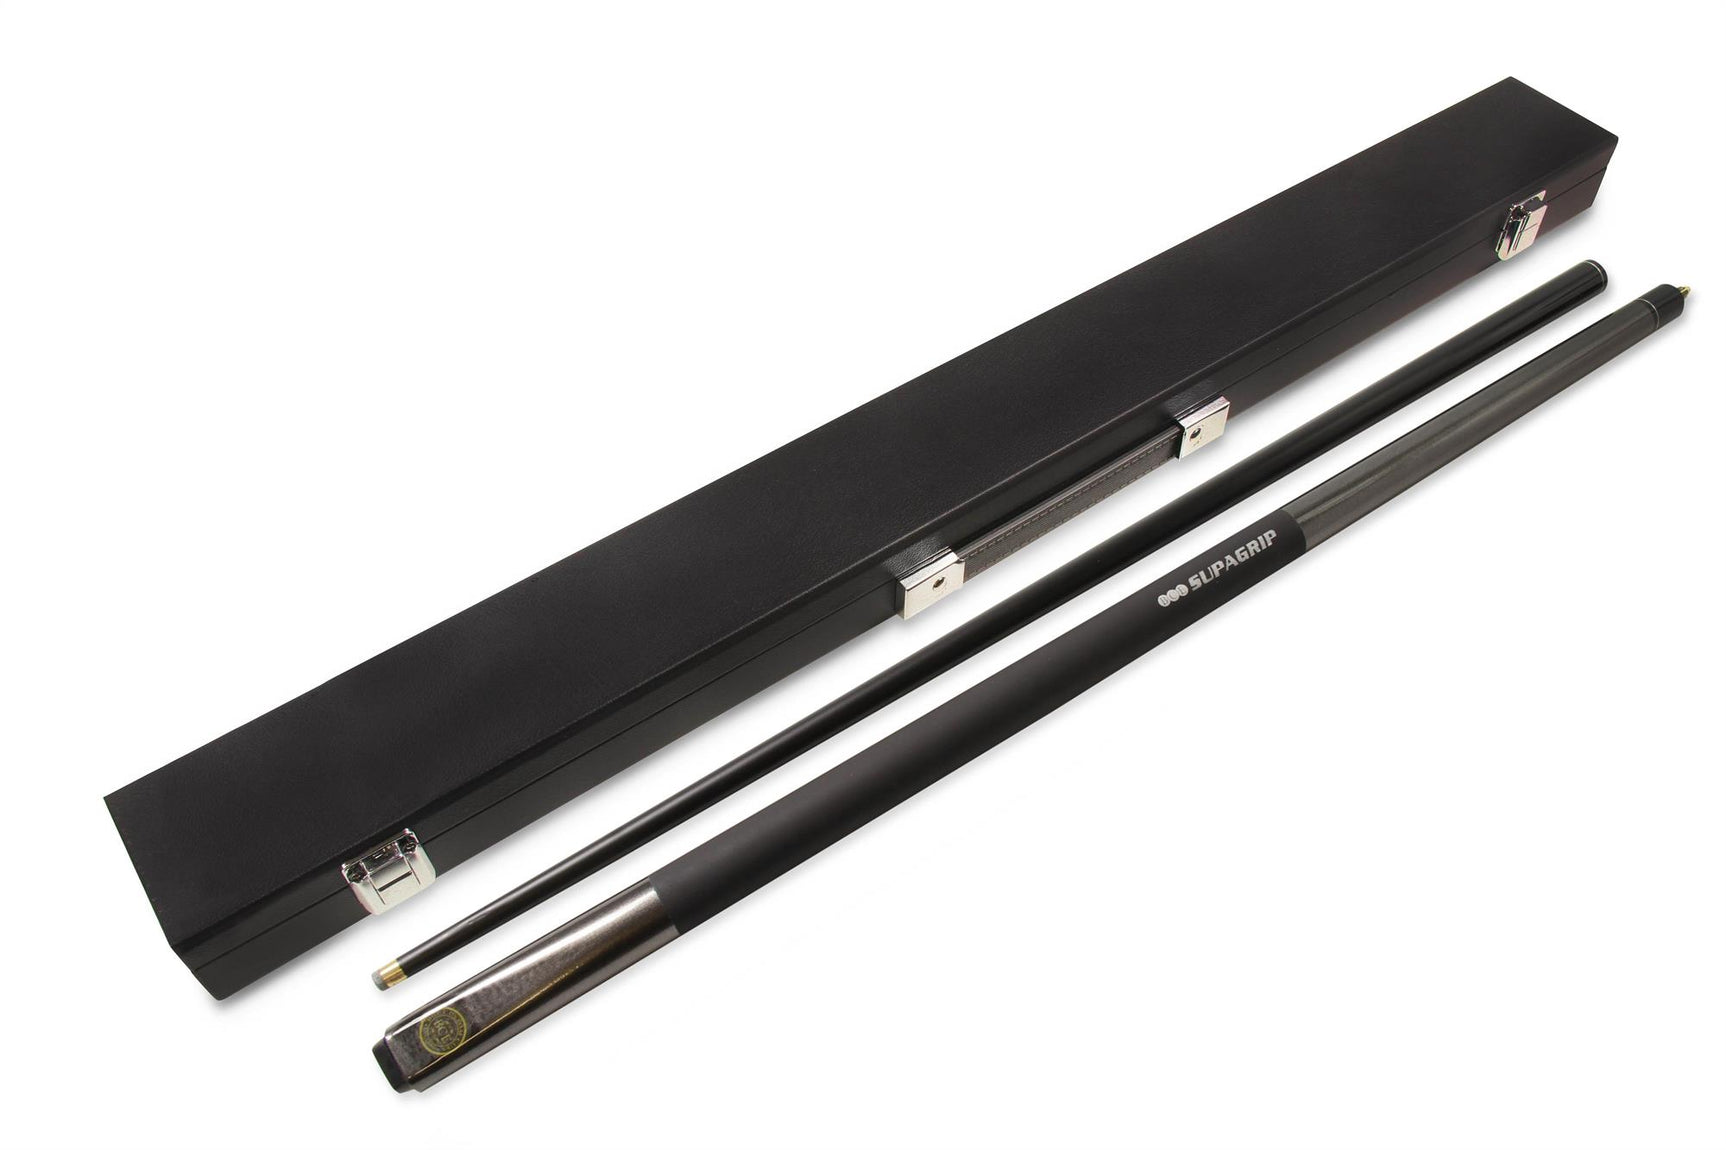 BCE MARK SELBY Metallic BLACK Simulated Graphite 2pc Snooker Cue & HARD CASE